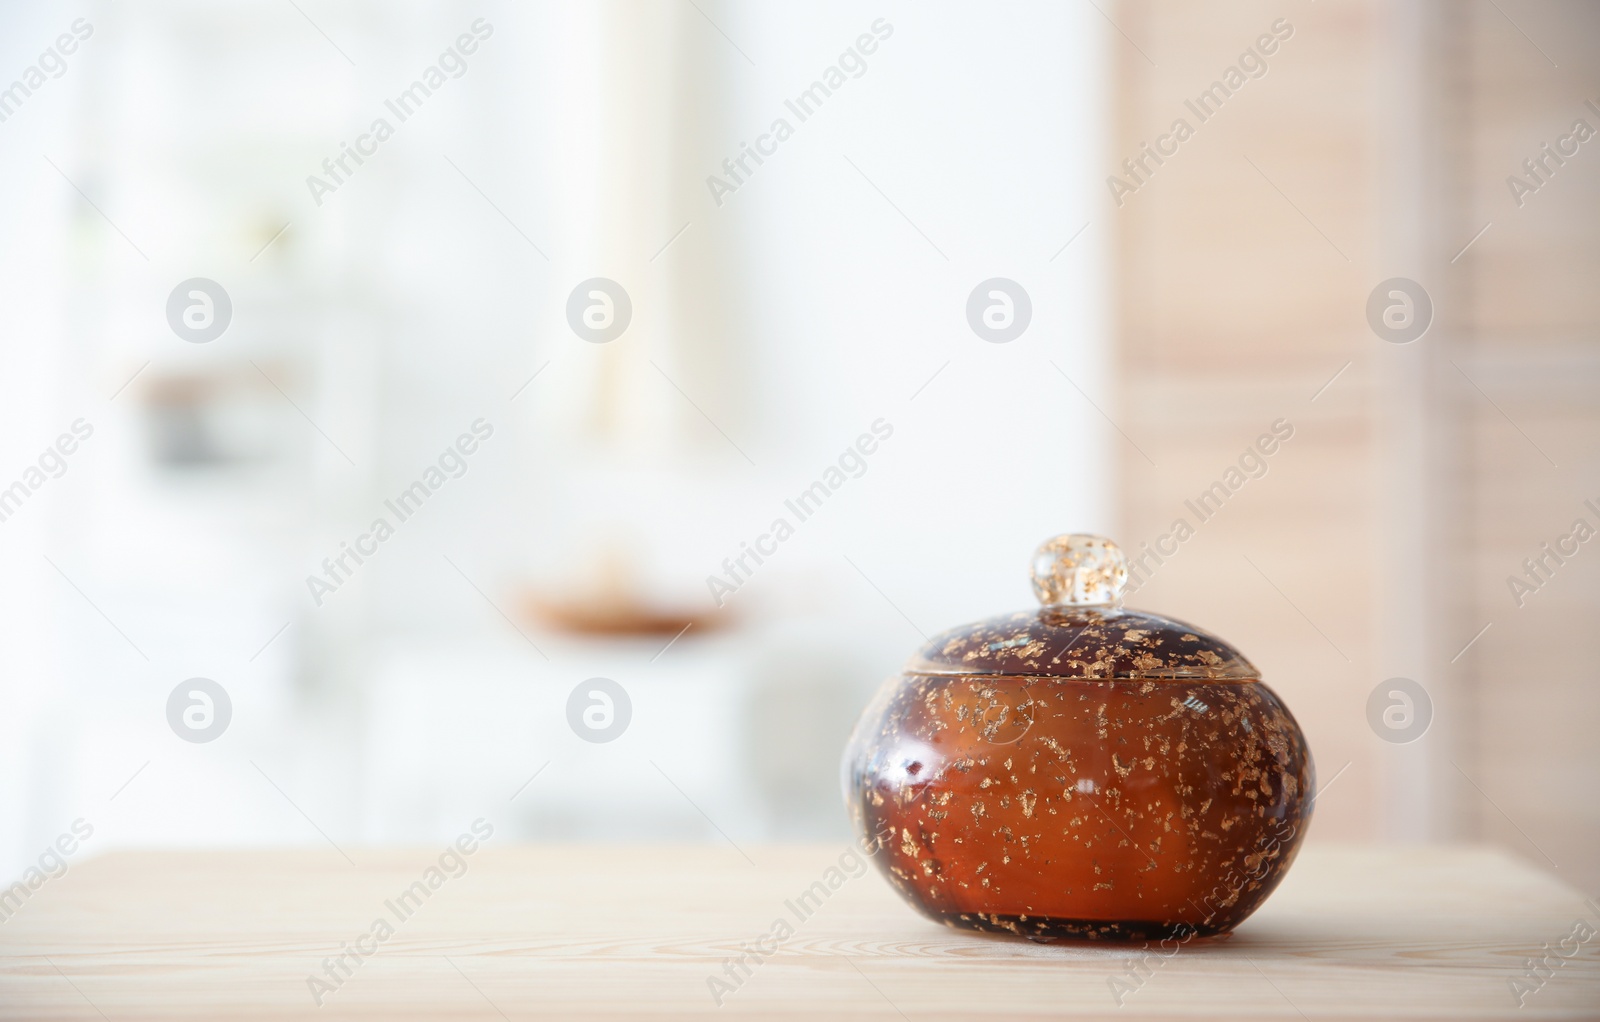 Photo of Small decorative box and blurred bathroom on background